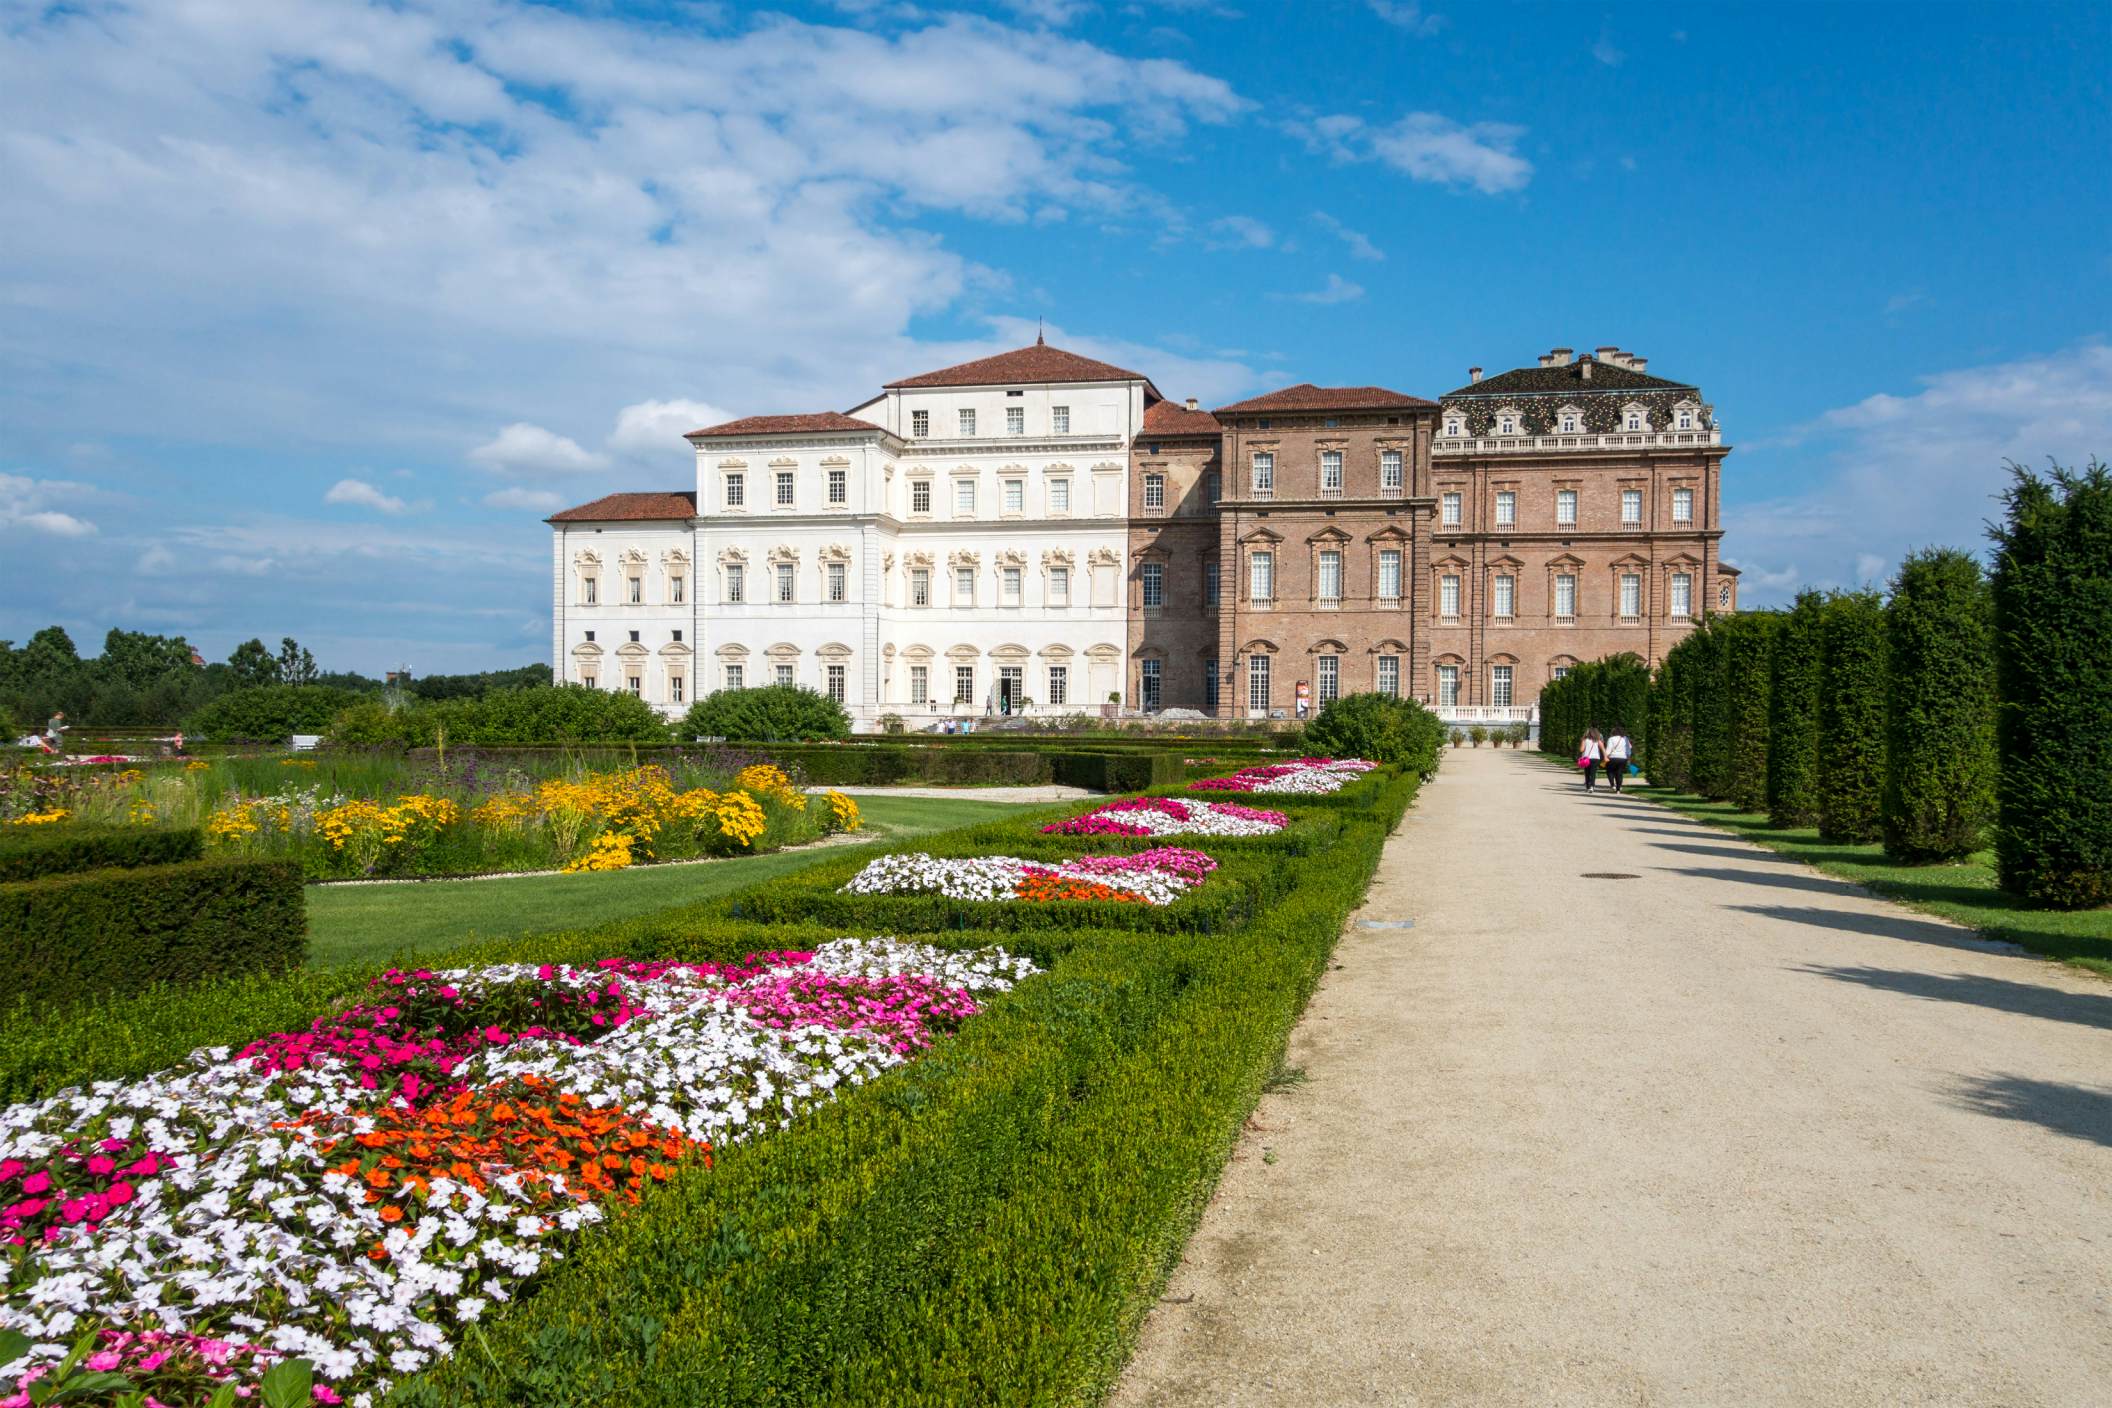 From Turin: La Venaria Reale Private Tour with Entry Ticket